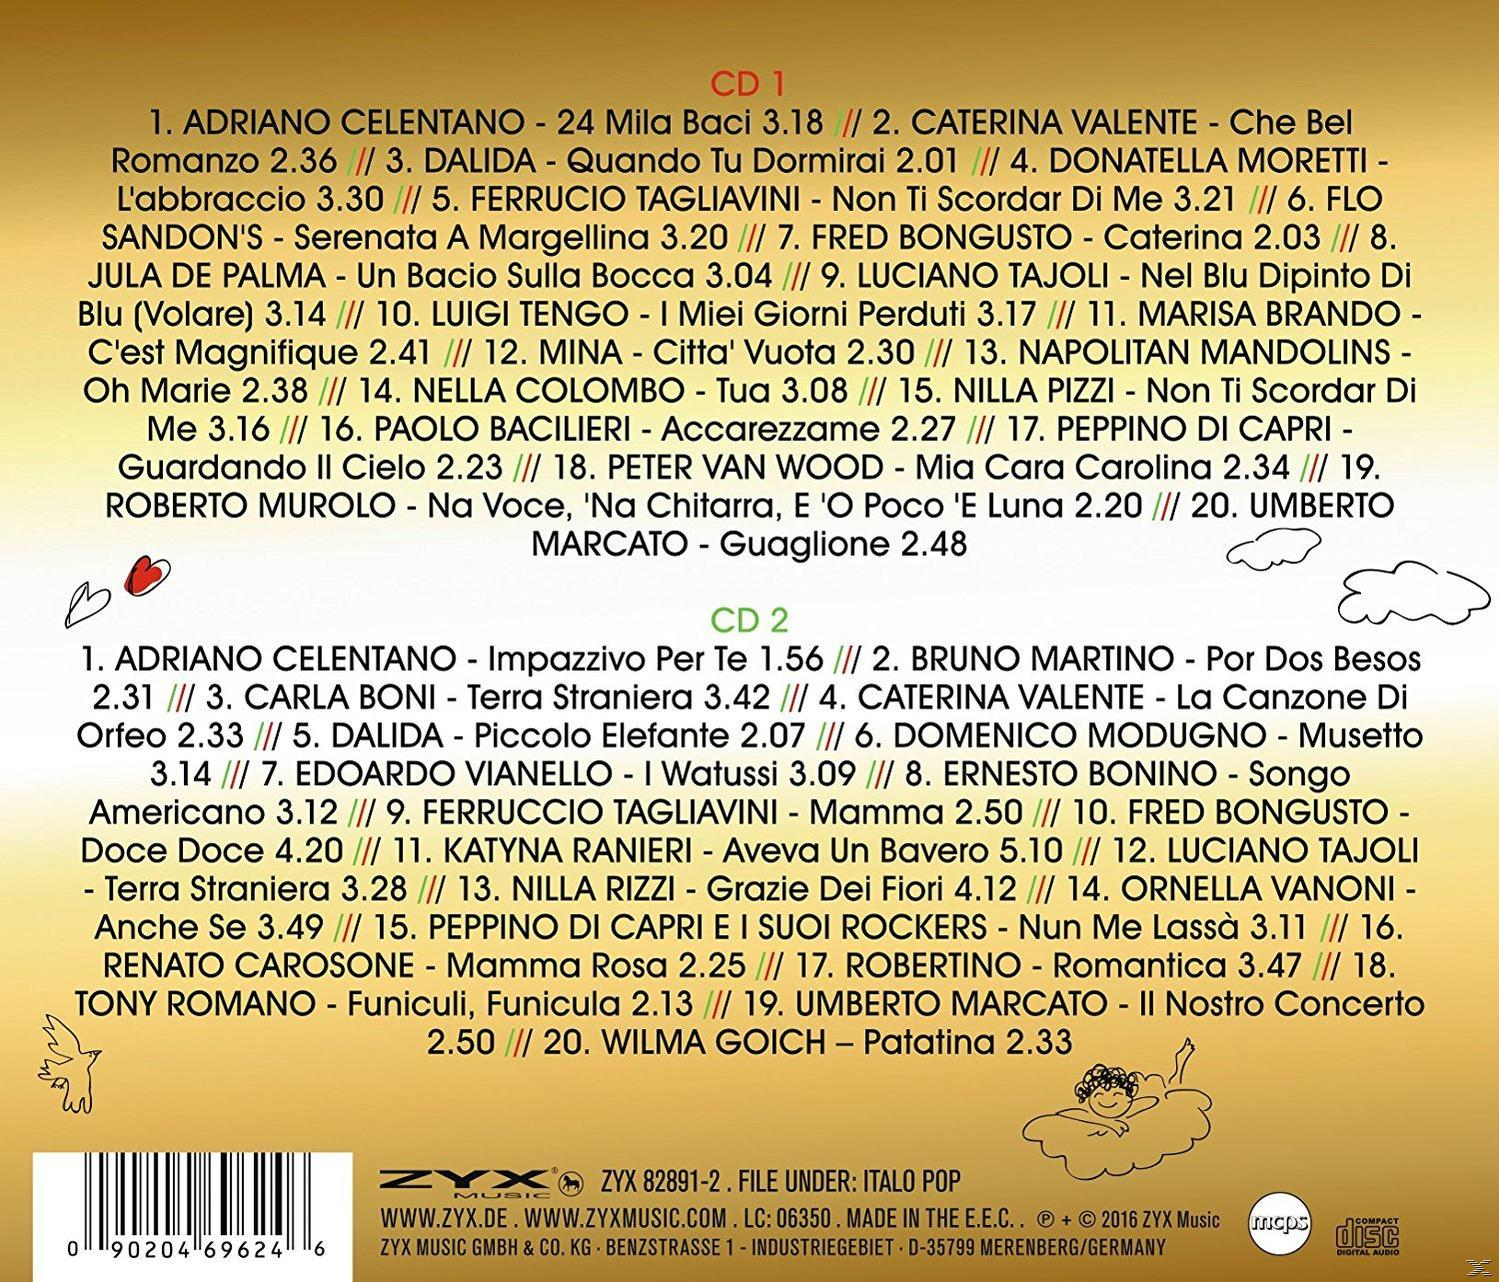 VARIOUS - Italian Canzone: Golden Hits - (CD)